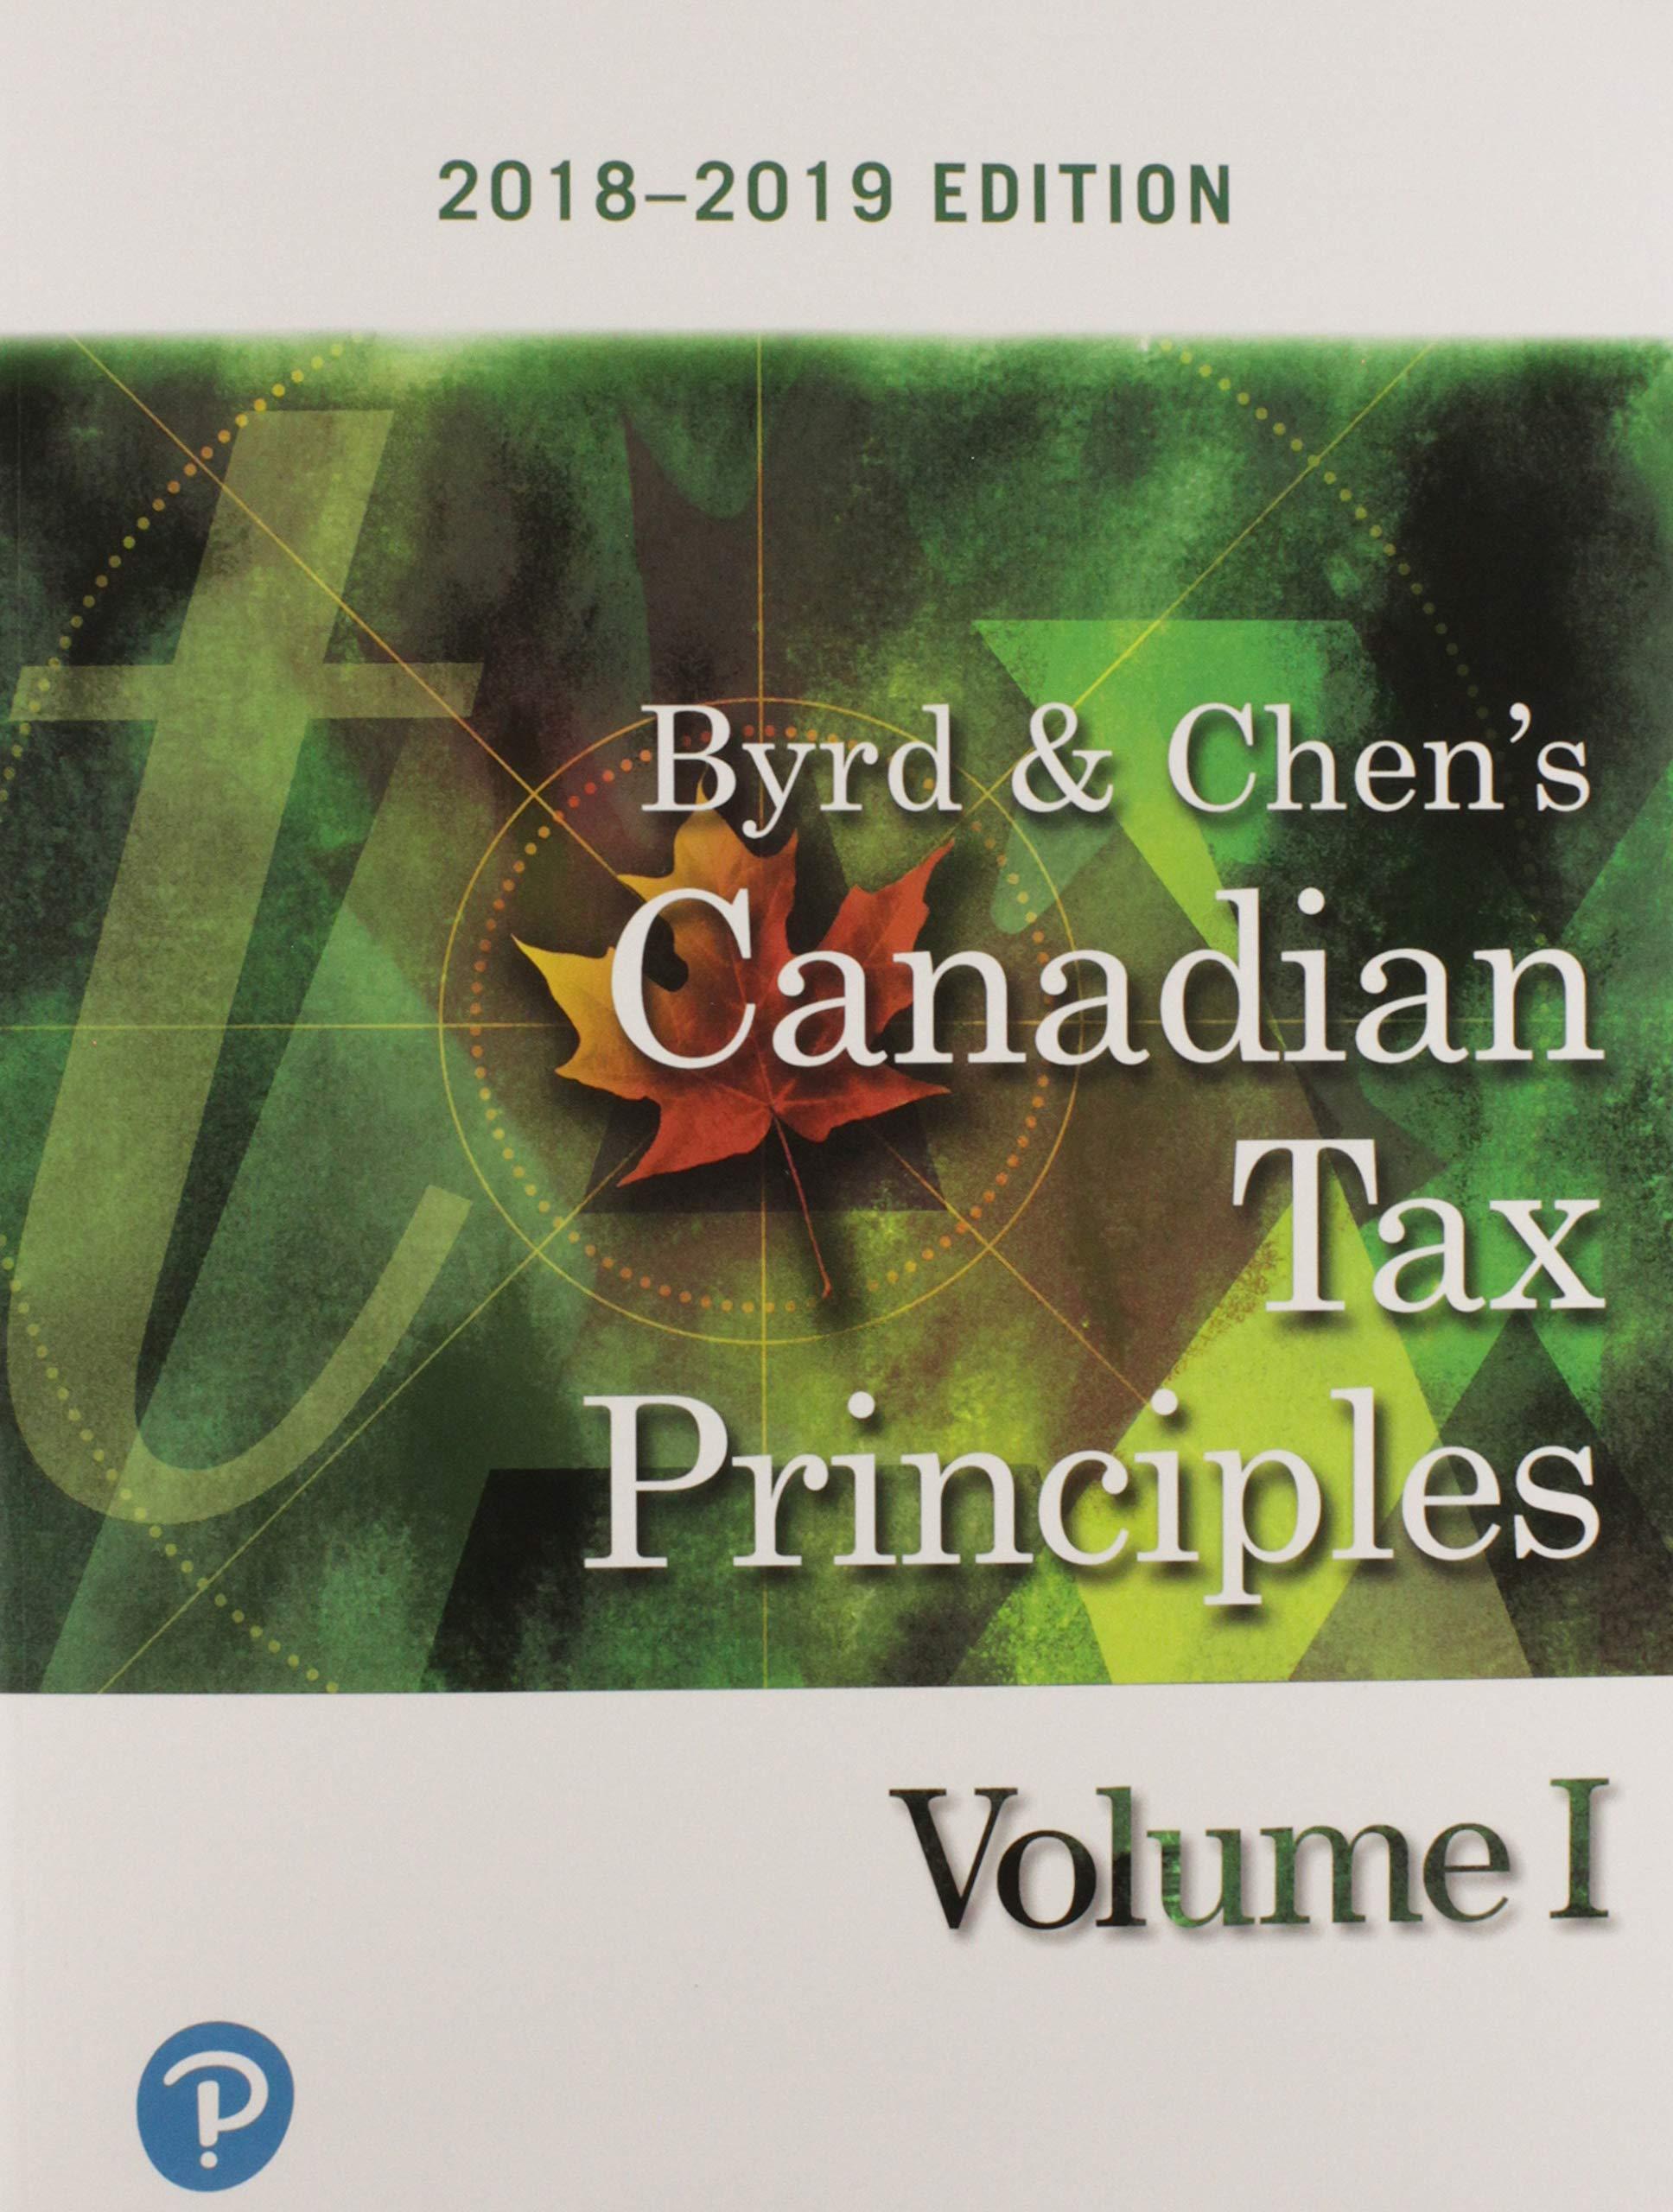 canadian tax principles volume 1 2018-2019 edition clarence byrd, ida chen 0135320720, 978-0135320723